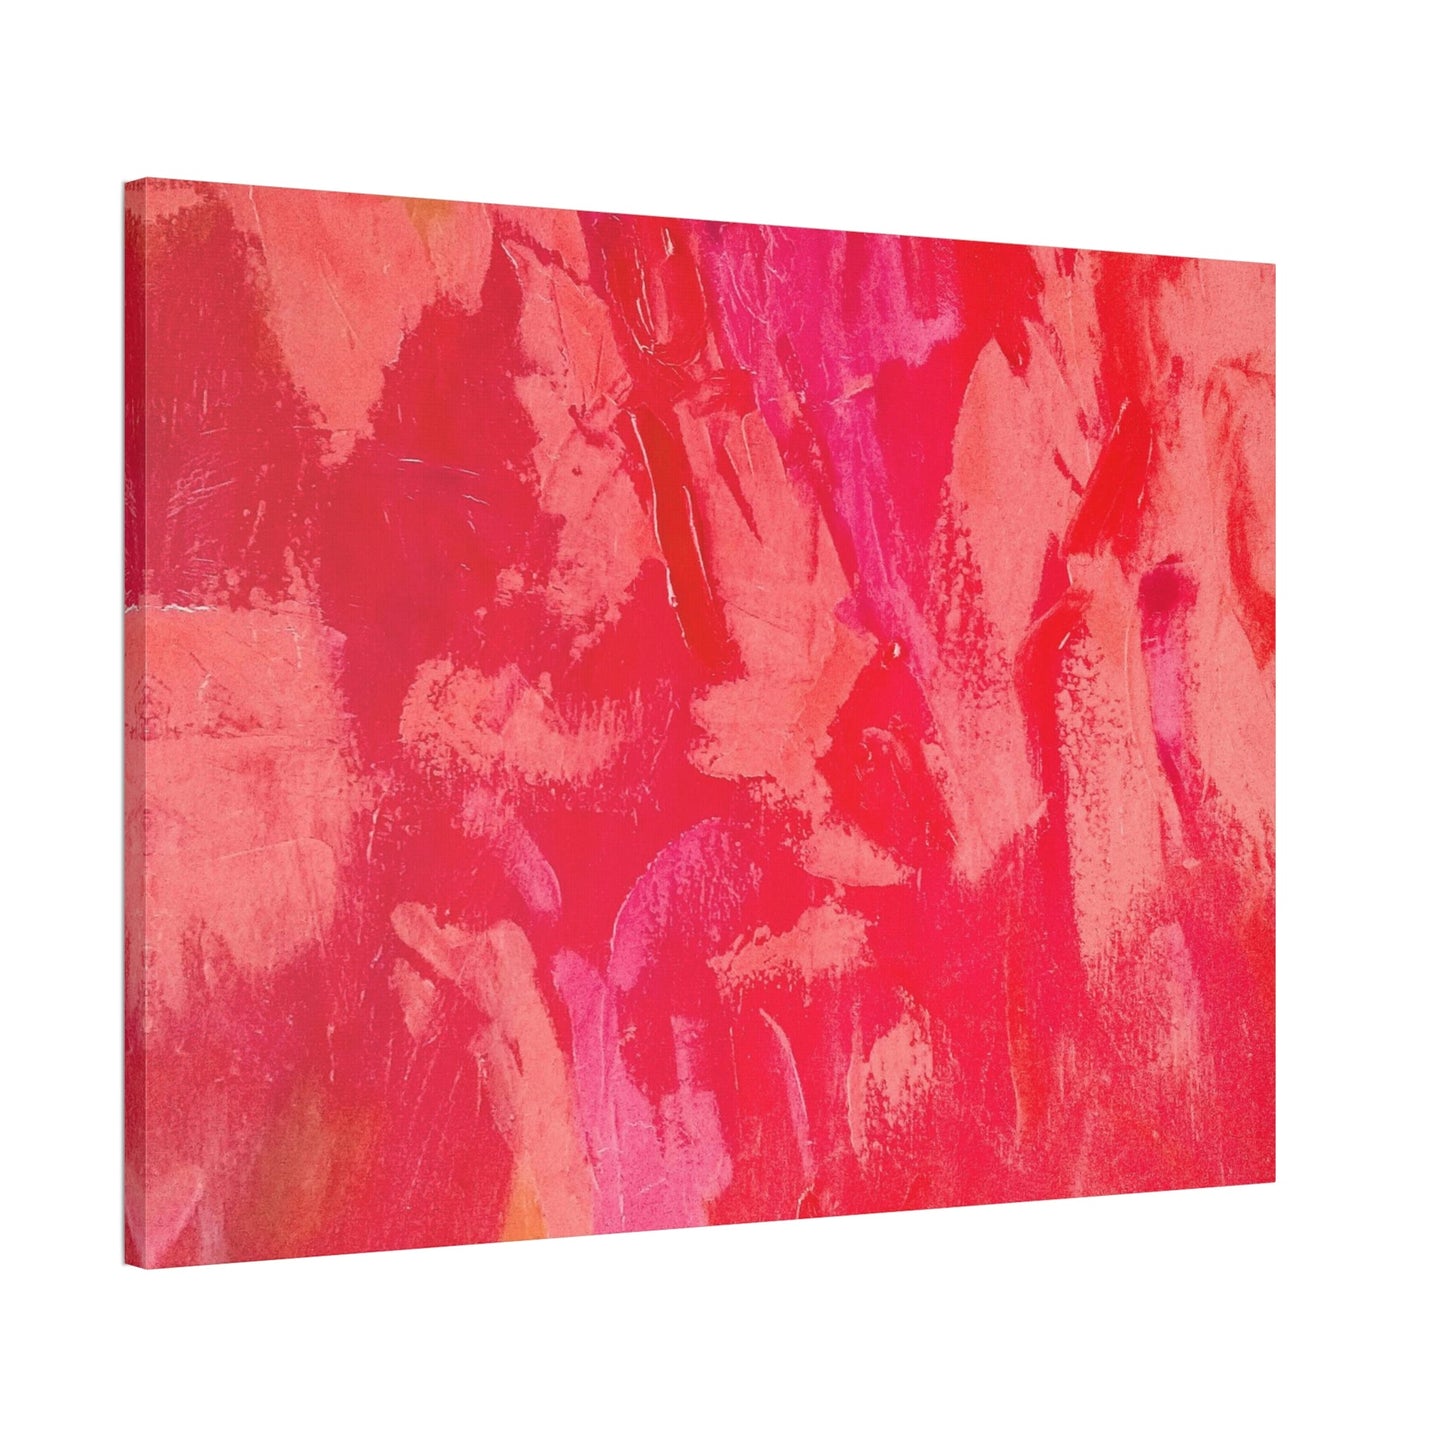 Vibrant Red: A Striking Print on Canvas to Add to Your Art Collection